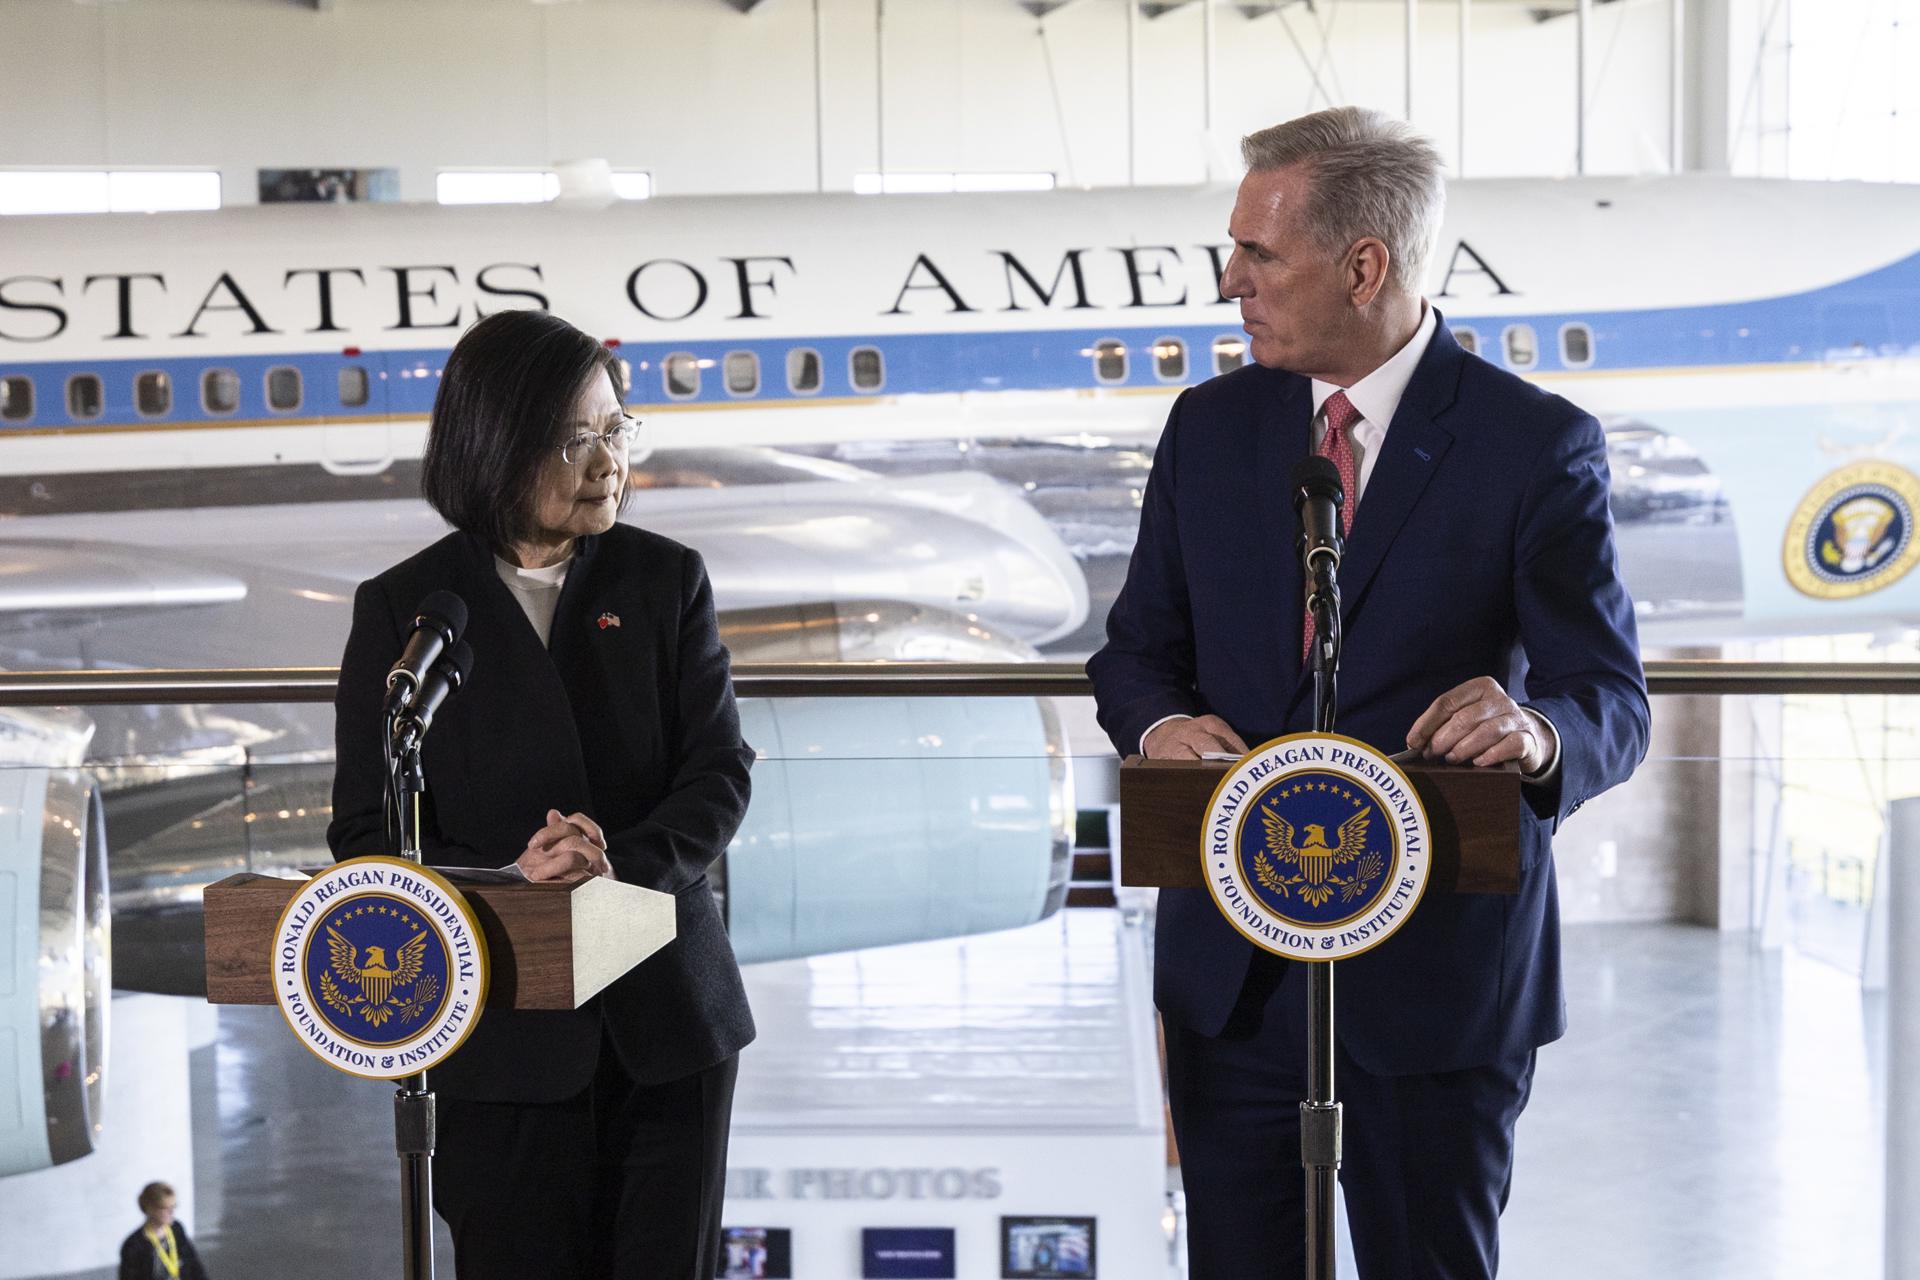 U.S. House speaker Kevin McCarthy and Taiwanese President Tsai Ing-wen hold a press conference following a bilateral meeting at the Ronald Reagan Presidential Library in Simi Valley, California, USA, 05 April 2023. EFE/EPA/ETIENNE LAURENT